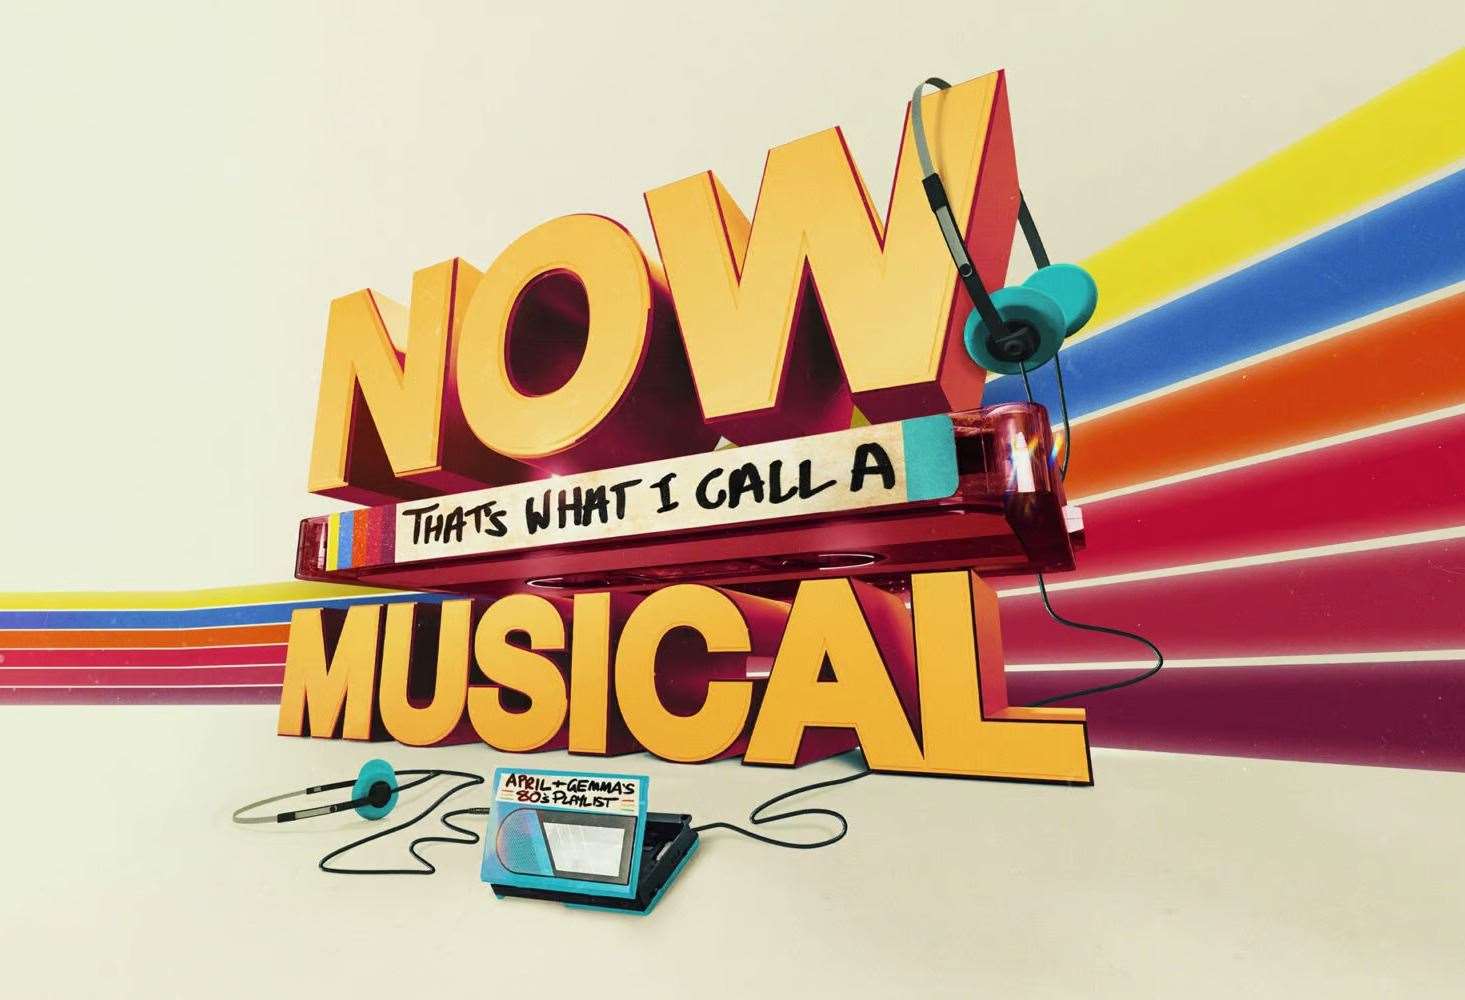 Now That's What I Call A Musical is a brand new show making its debut this year